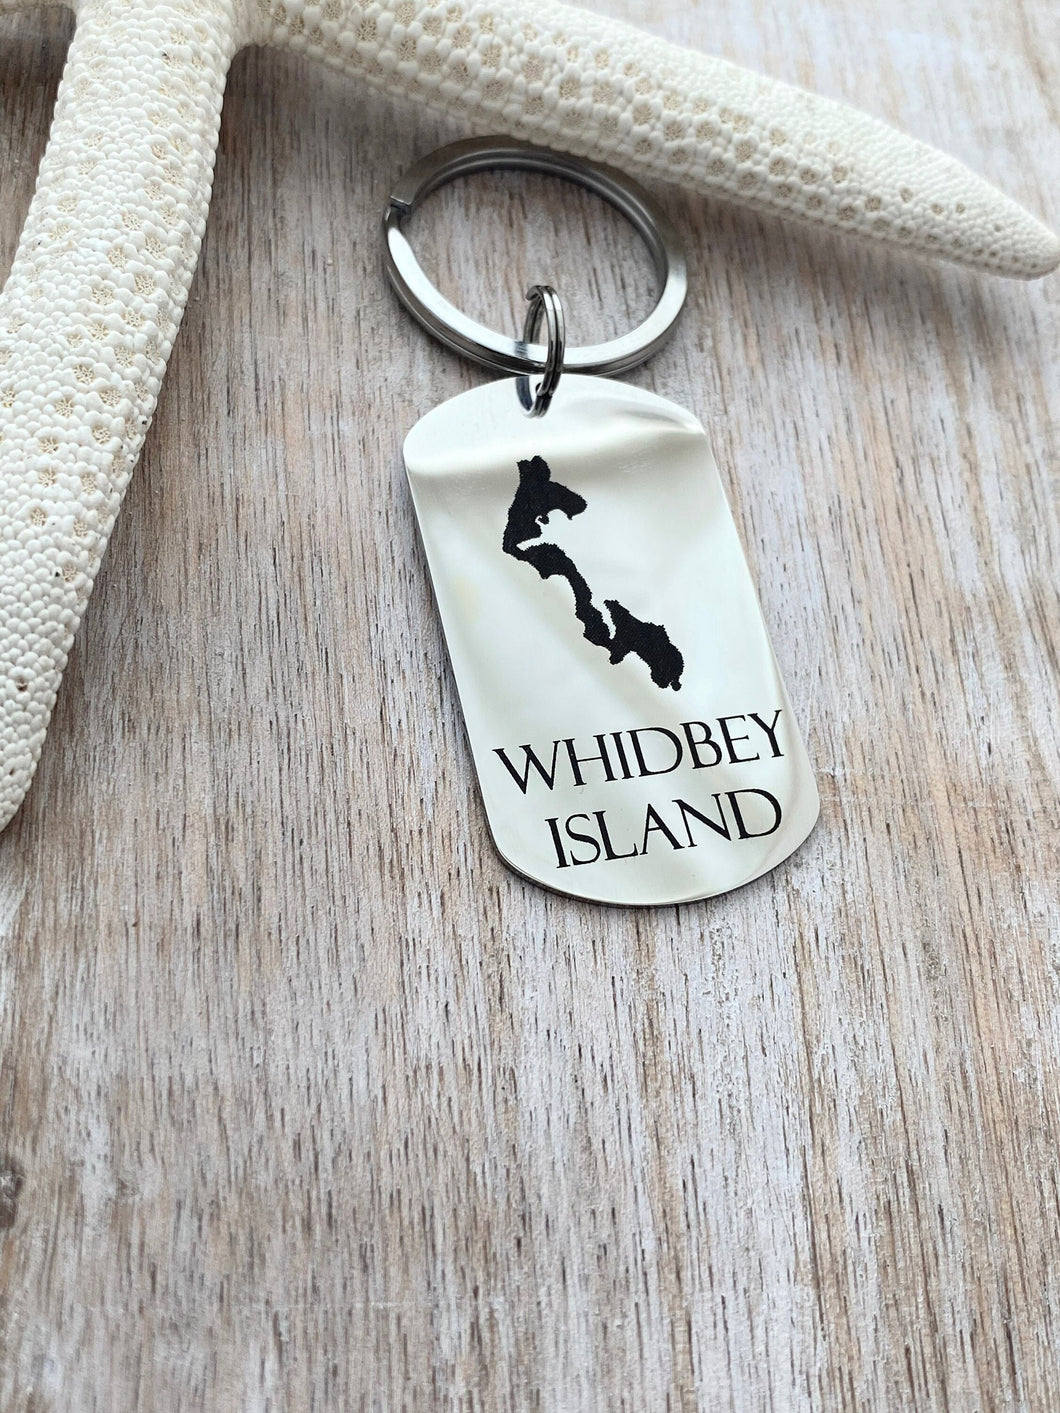 Whidbey Island dog tag Keychain - Stainless steel engraved Whidbey Key Chain - Gift for Him - Hometown - Washington State